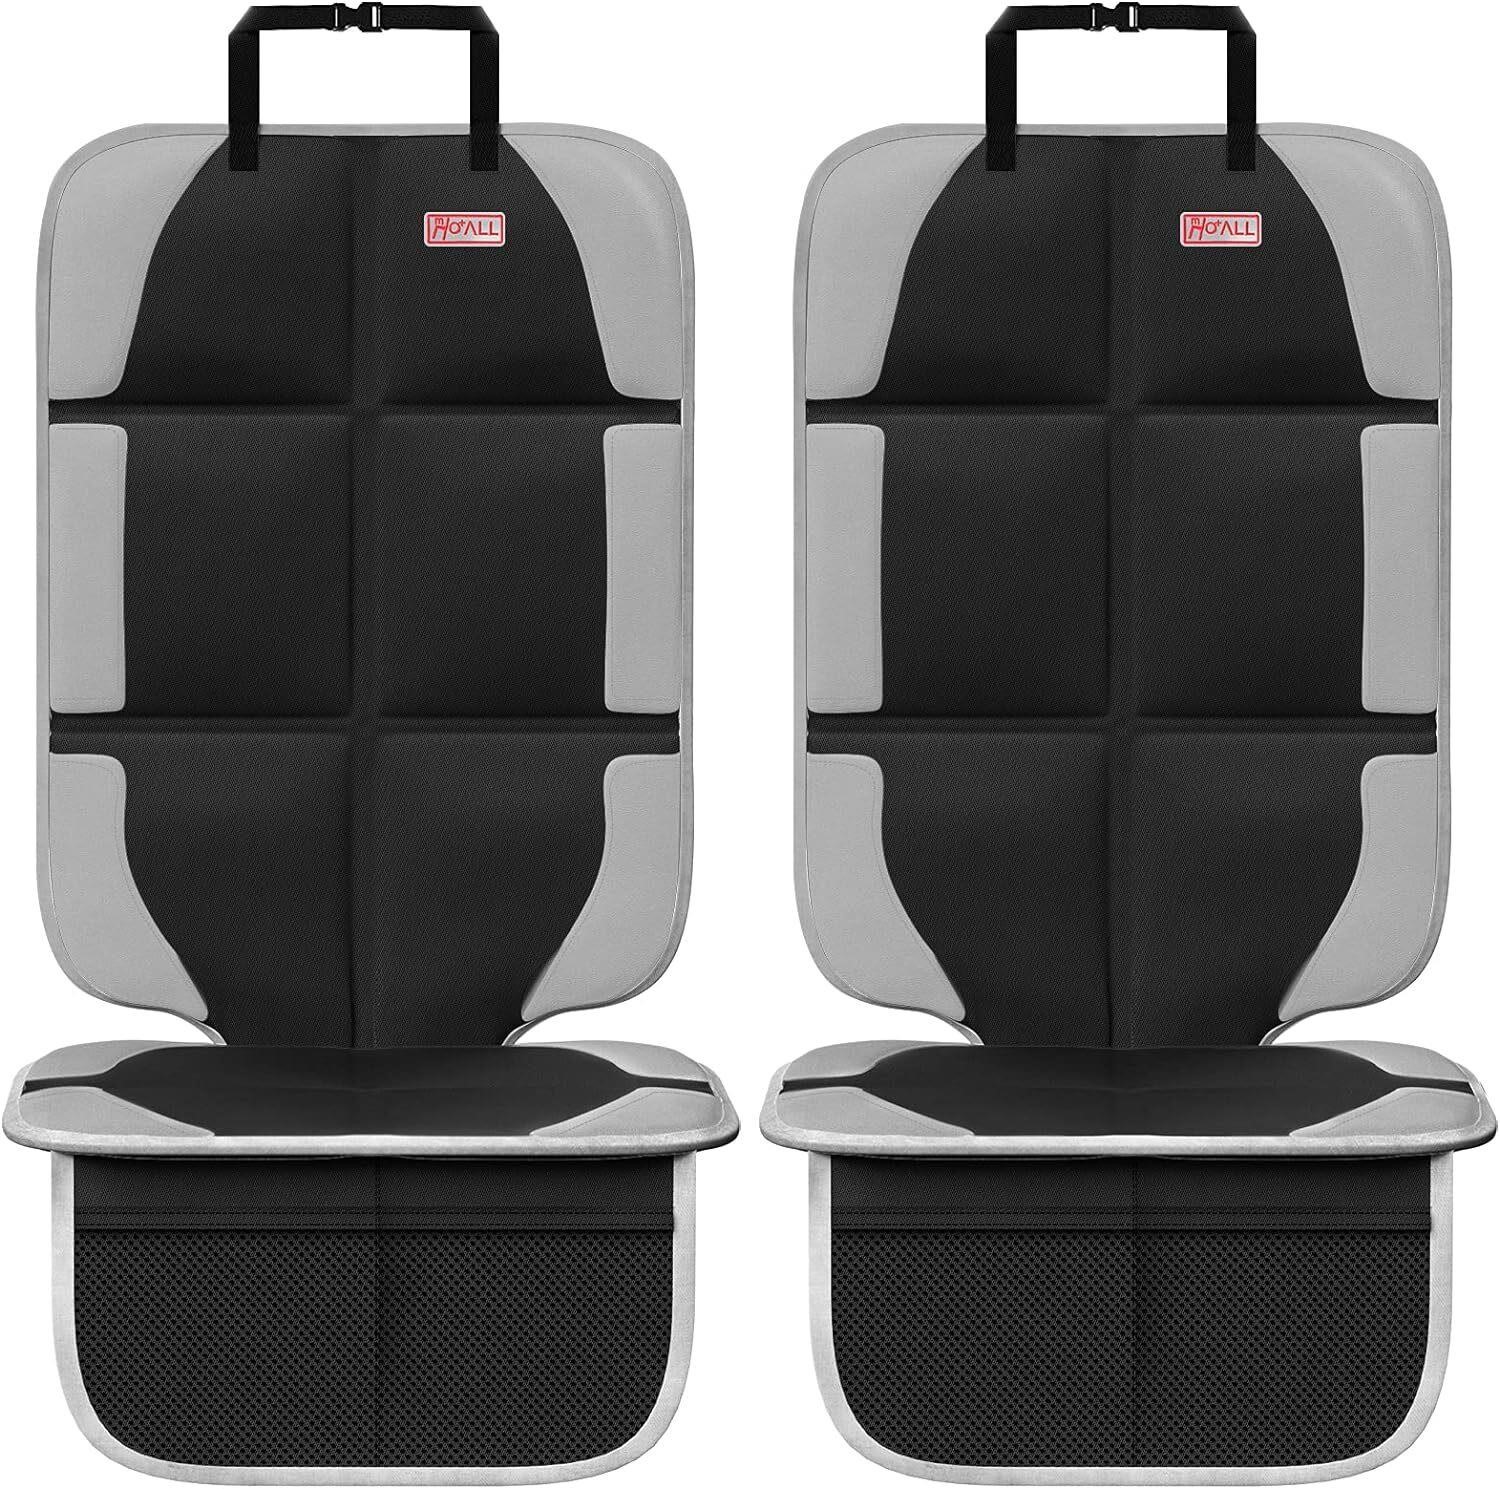 $27  XL Car Seat Protector  2 Pack with Bag